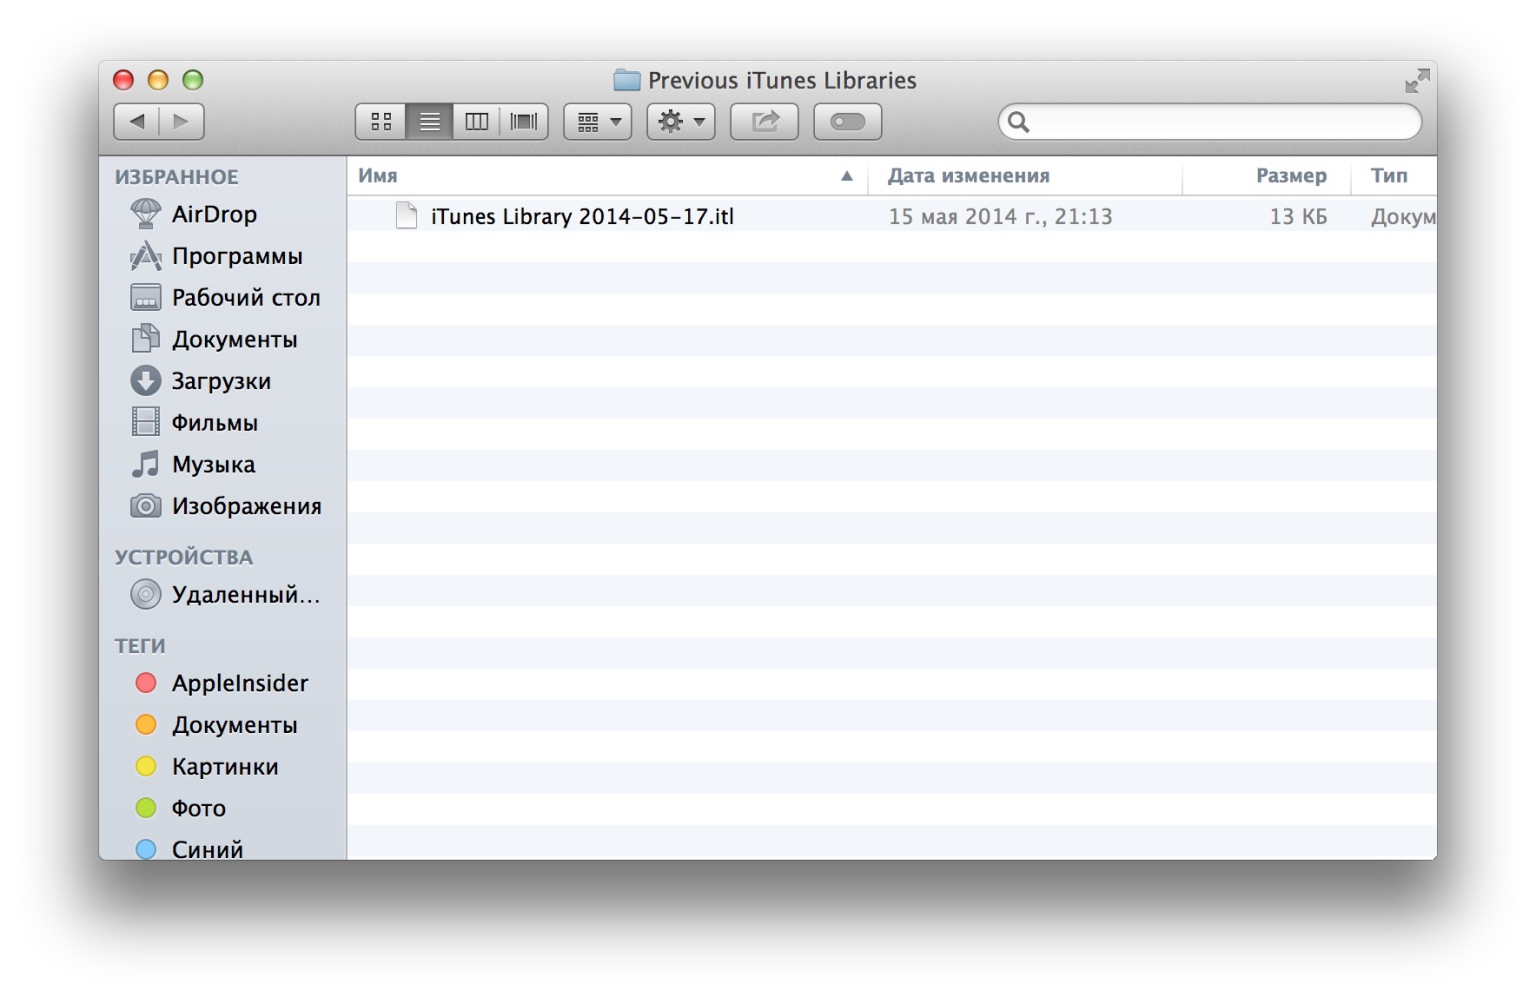 ITUNES общий доступ к файлам. File ITUNES Library ITL cannot be read. Файл itunes library itl